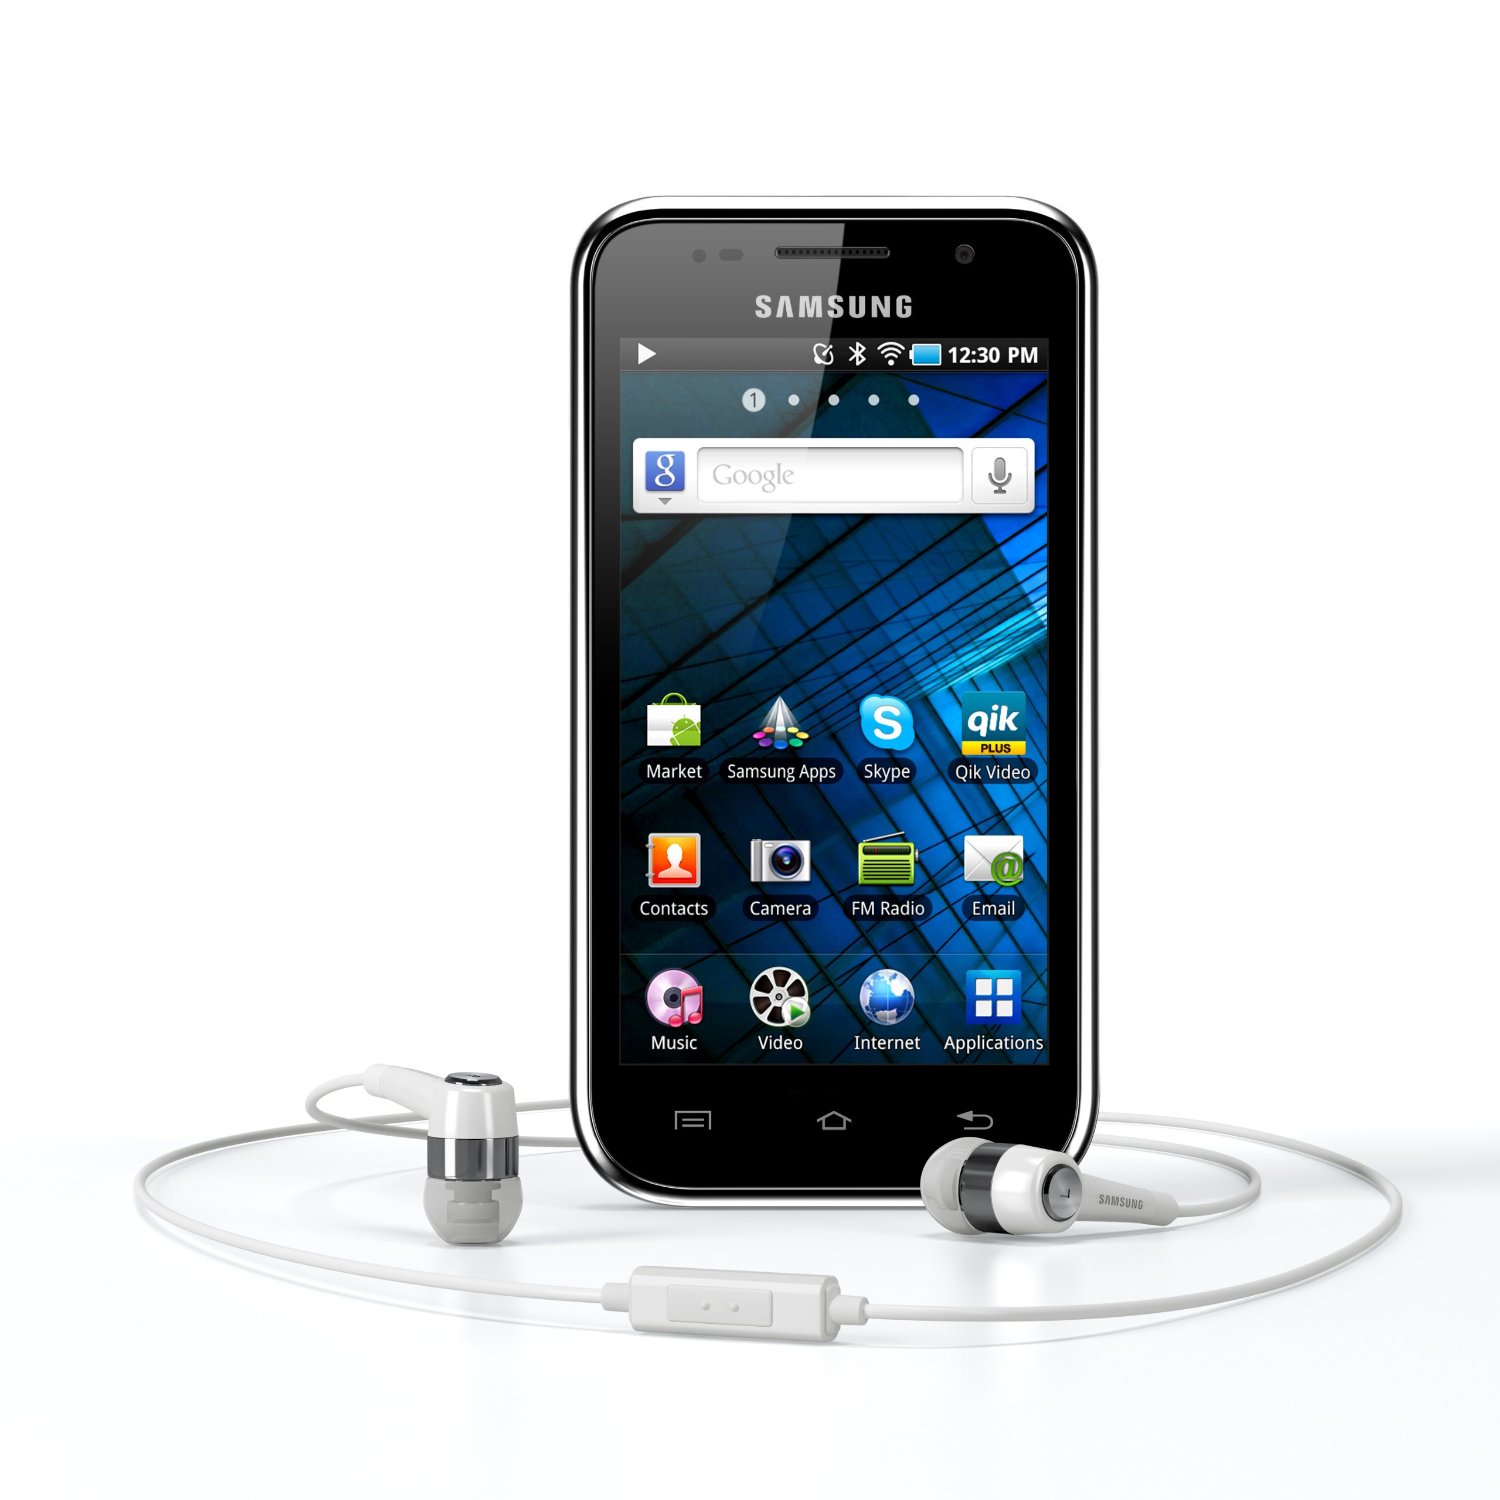 http://thetechjournal.com/wp-content/uploads/images/1109/1317201843-samsung-galaxy-40inch-android-mp3-player-1.jpg